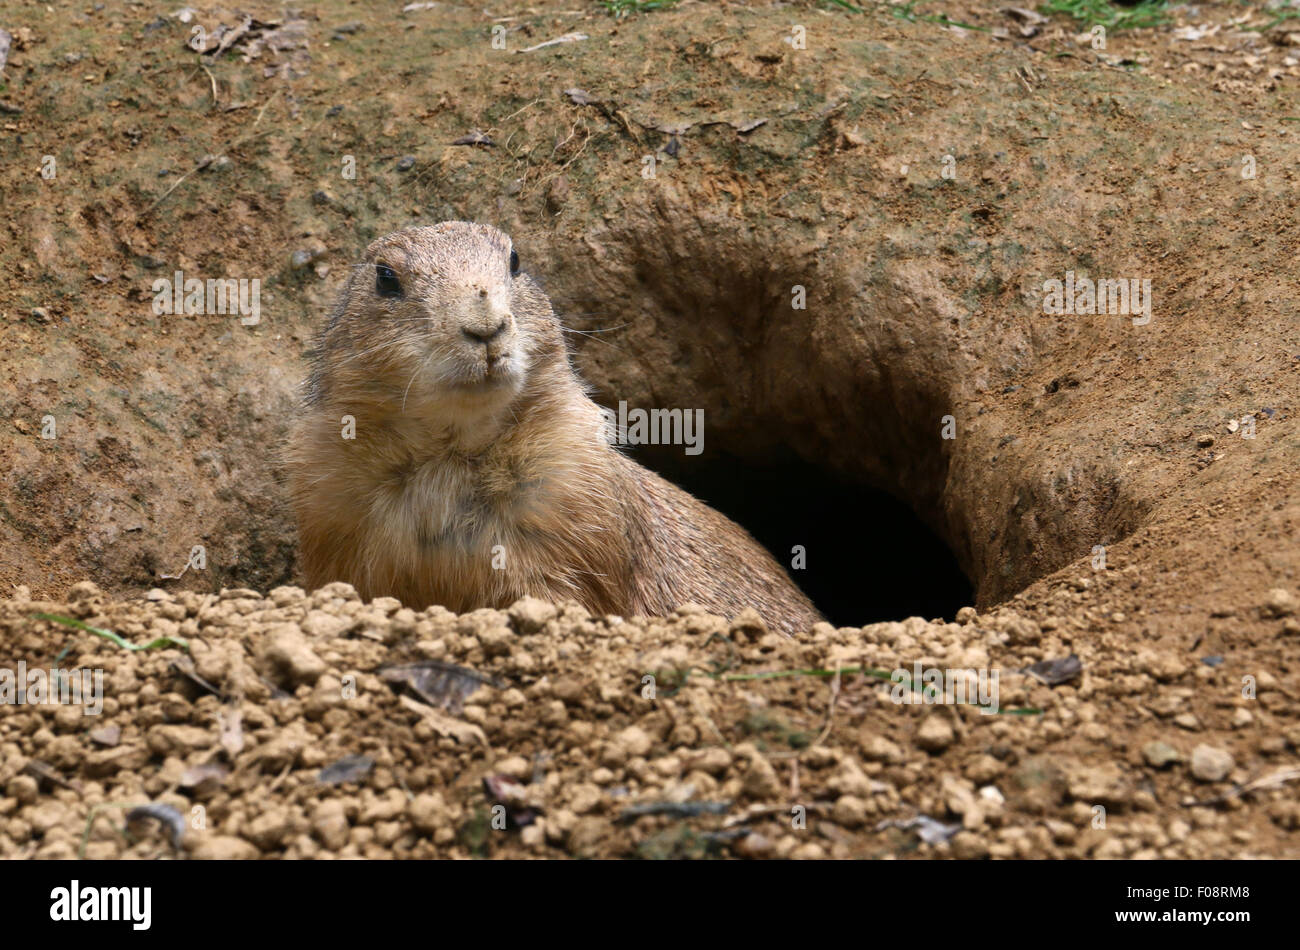 Black-tailed prairie dog in burrow at National Zoo in Washington D.C. Stock Photo